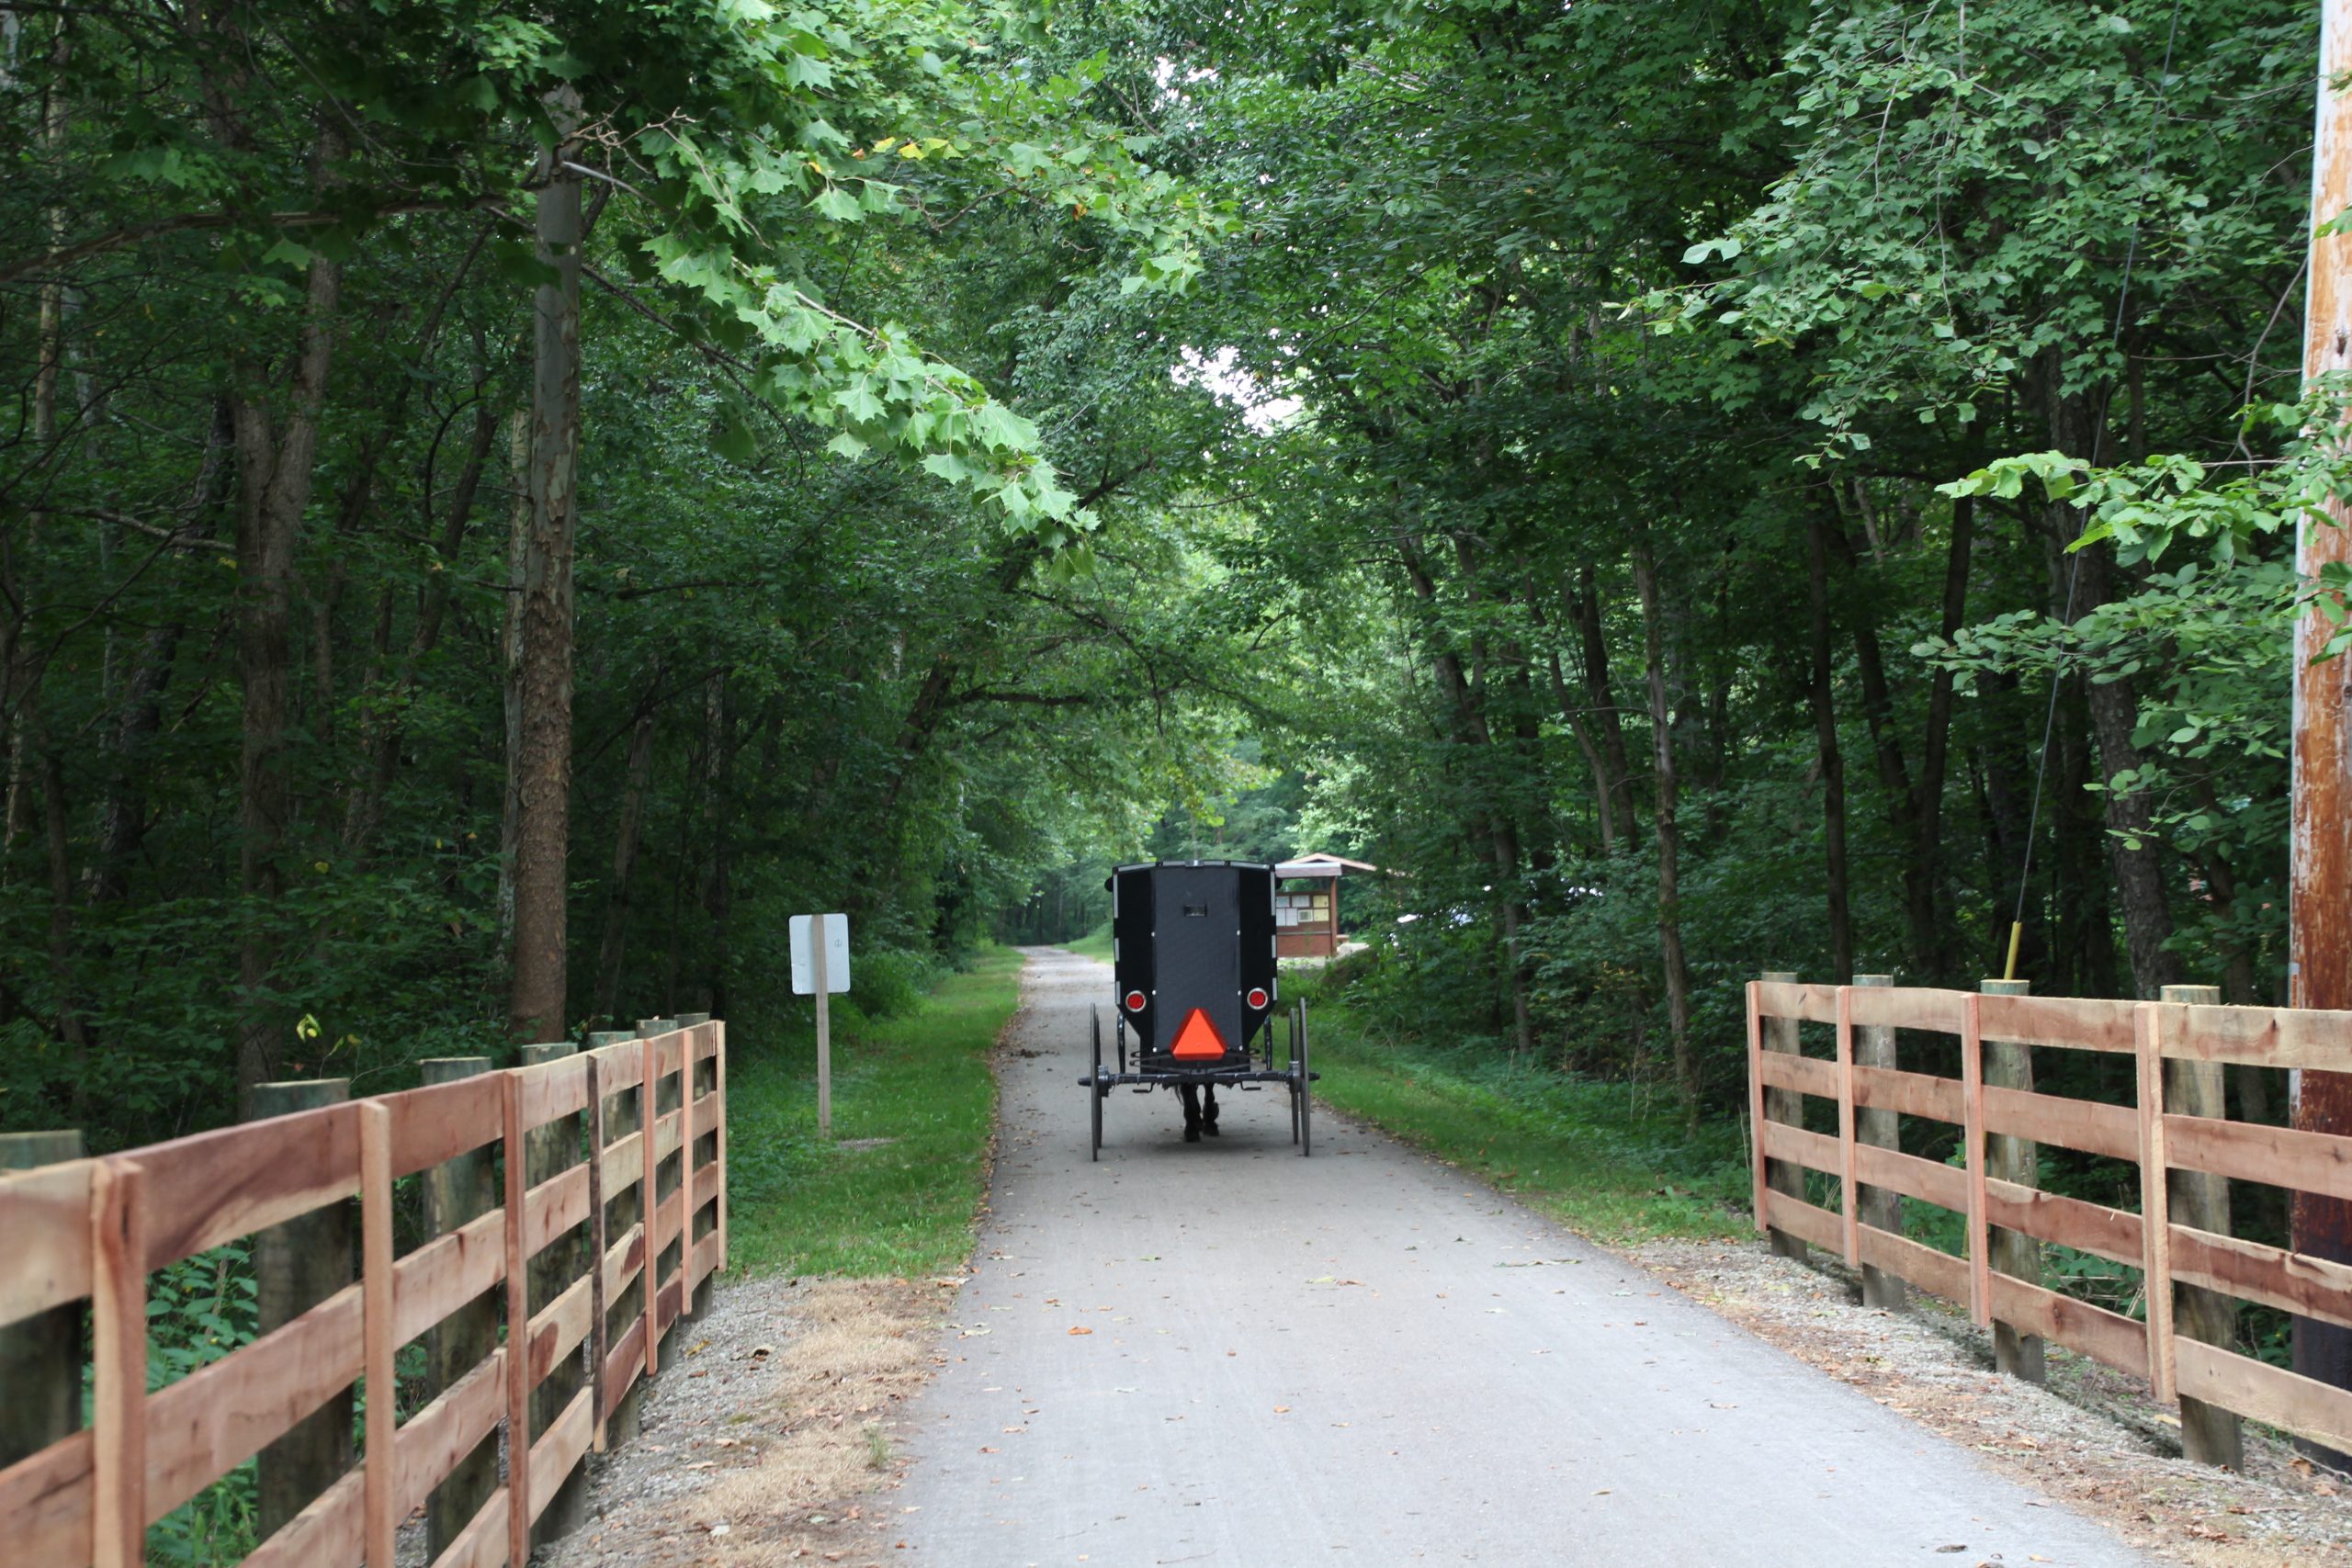 Things to Do in Amish Country Ohio